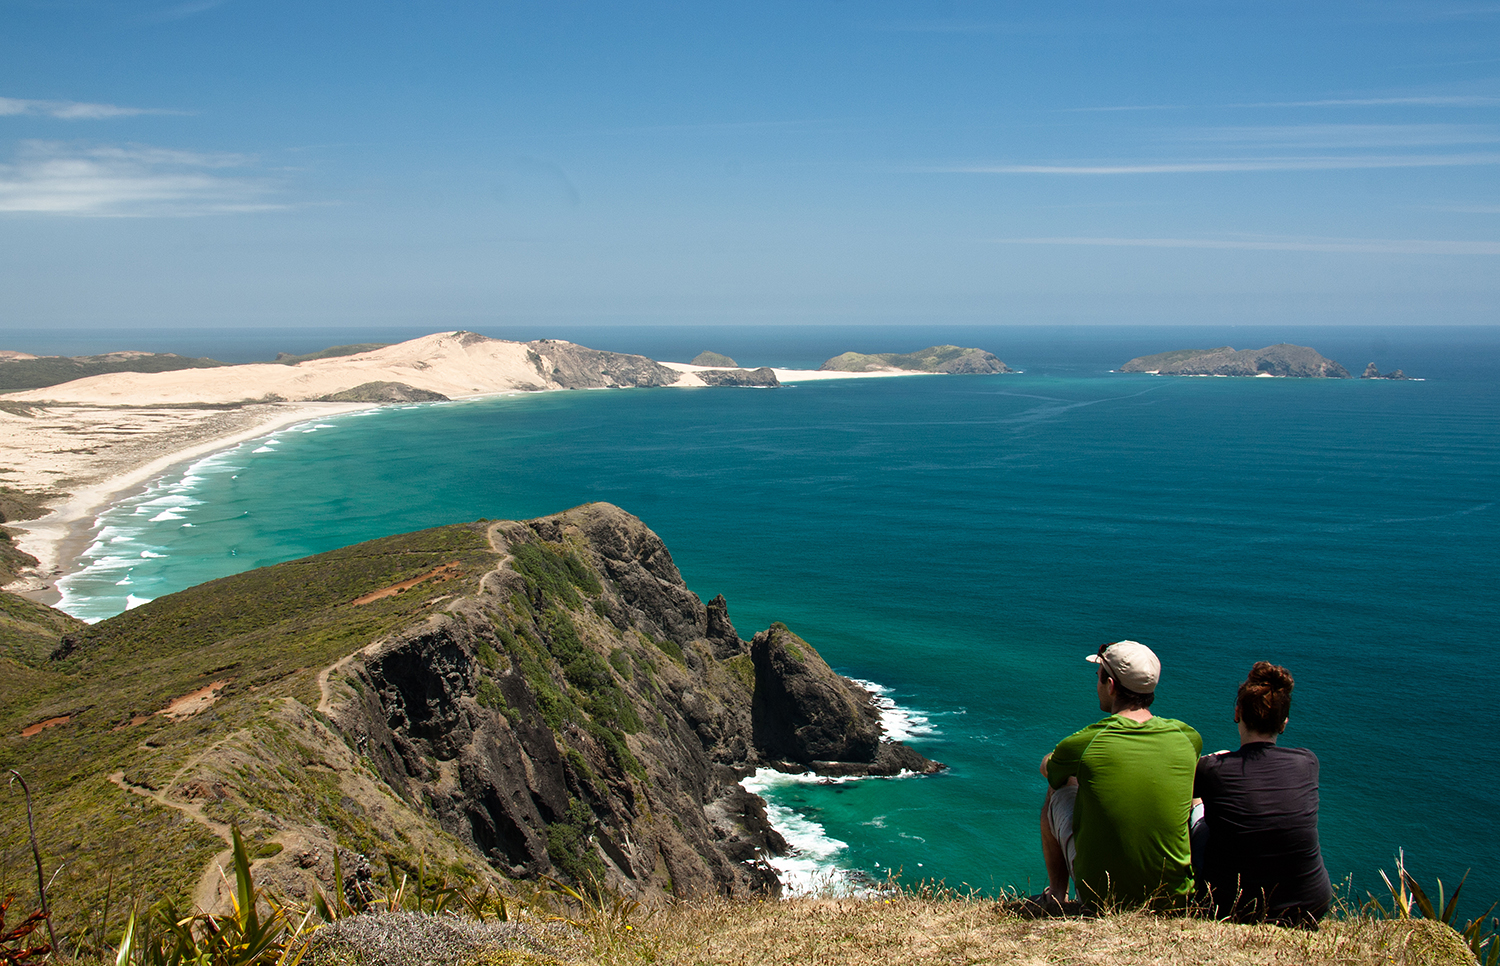 Want to picnic overlooking this view? Lace up your hiking boots for cliffside trails at Cape Reinga in New Zealand. Image by Dan / CC BY 2.0